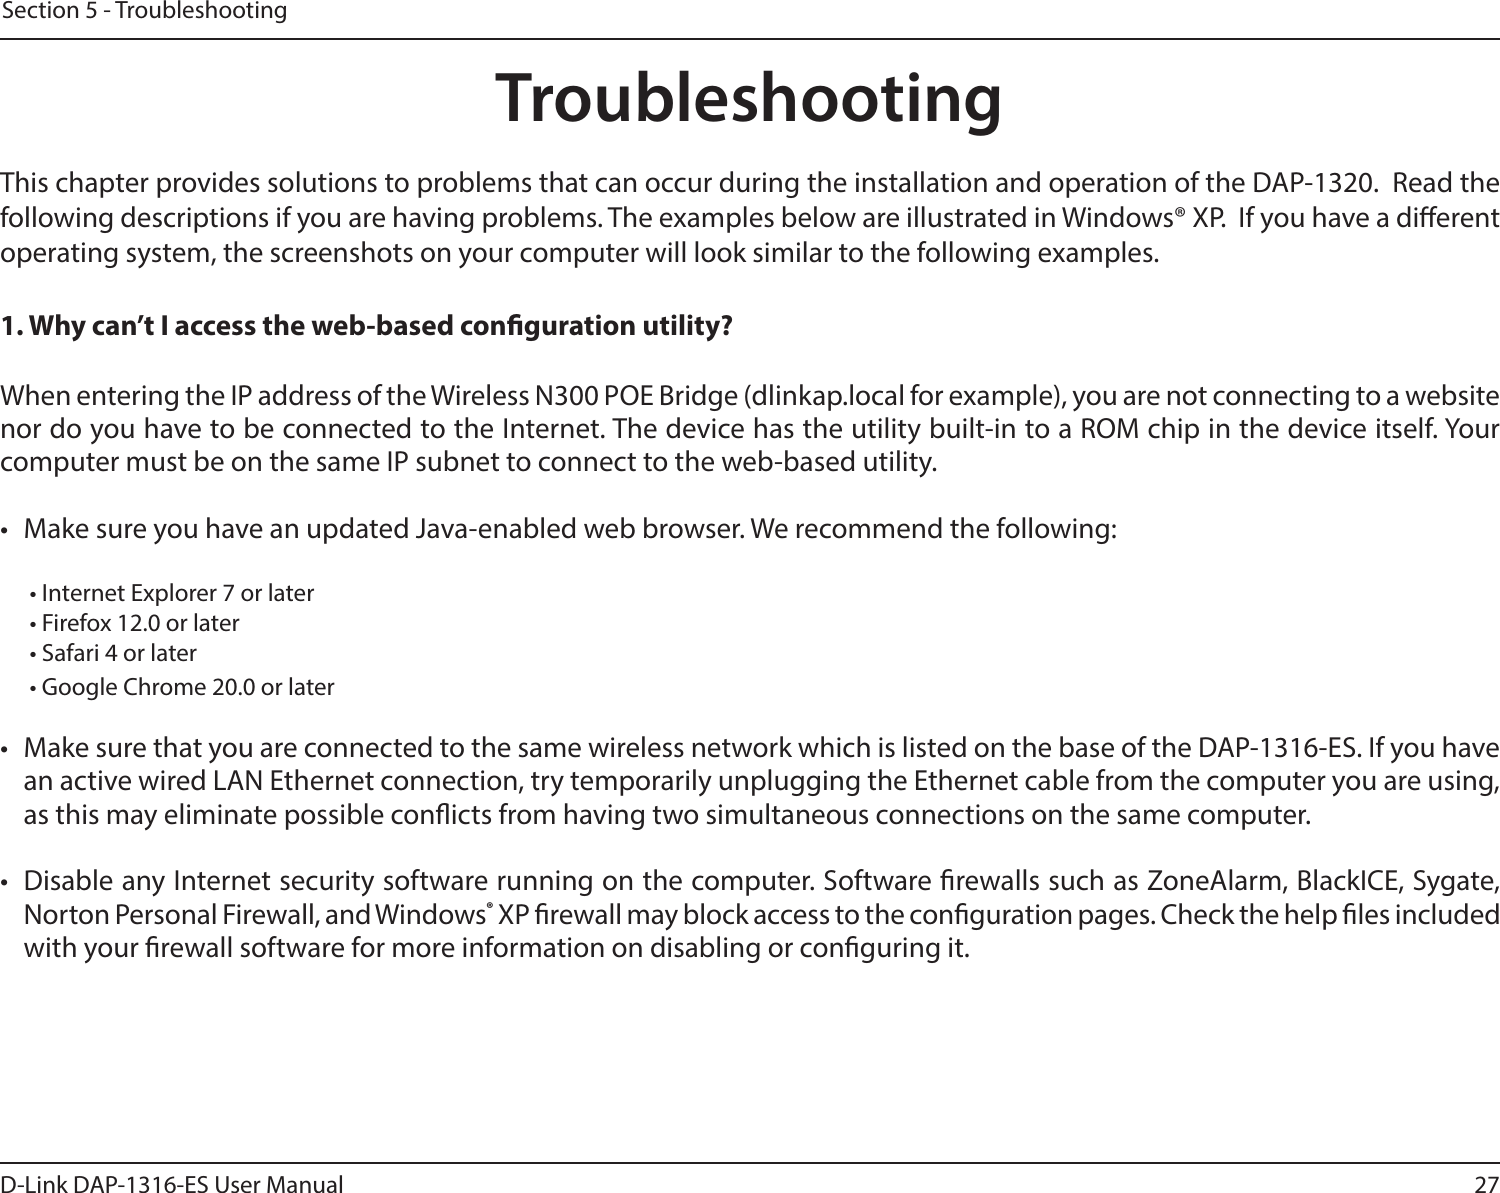 27D-Link DAP-1316-ES User ManualSection 5 - TroubleshootingTroubleshootingThis chapter provides solutions to problems that can occur during the installation and operation of the DAP-1320.  Read the following descriptions if you are having problems. The examples below are illustrated in Windows® XP.  If you have a dierent operating system, the screenshots on your computer will look similar to the following examples.1. Why can’t I access the web-based conguration utility?When entering the IP address of the Wireless N300 POE Bridge (dlinkap.local for example), you are not connecting to a website nor do you have to be connected to the Internet. The device has the utility built-in to a ROM chip in the device itself. Your computer must be on the same IP subnet to connect to the web-based utility. •  Make sure you have an updated Java-enabled web browser. We recommend the following:  • Internet Explorer 7 or later• Firefox 12.0 or later• Safari 4 or later• Google Chrome 20.0 or later•  Make sure that you are connected to the same wireless network which is listed on the base of the DAP-1316-ES. If you have an active wired LAN Ethernet connection, try temporarily unplugging the Ethernet cable from the computer you are using, as this may eliminate possible conicts from having two simultaneous connections on the same computer. •  Disable any Internet security software running on the computer. Software rewalls such as ZoneAlarm, BlackICE, Sygate, Norton Personal Firewall, and Windows® XP rewall may block access to the conguration pages. Check the help les included with your rewall software for more information on disabling or conguring it.